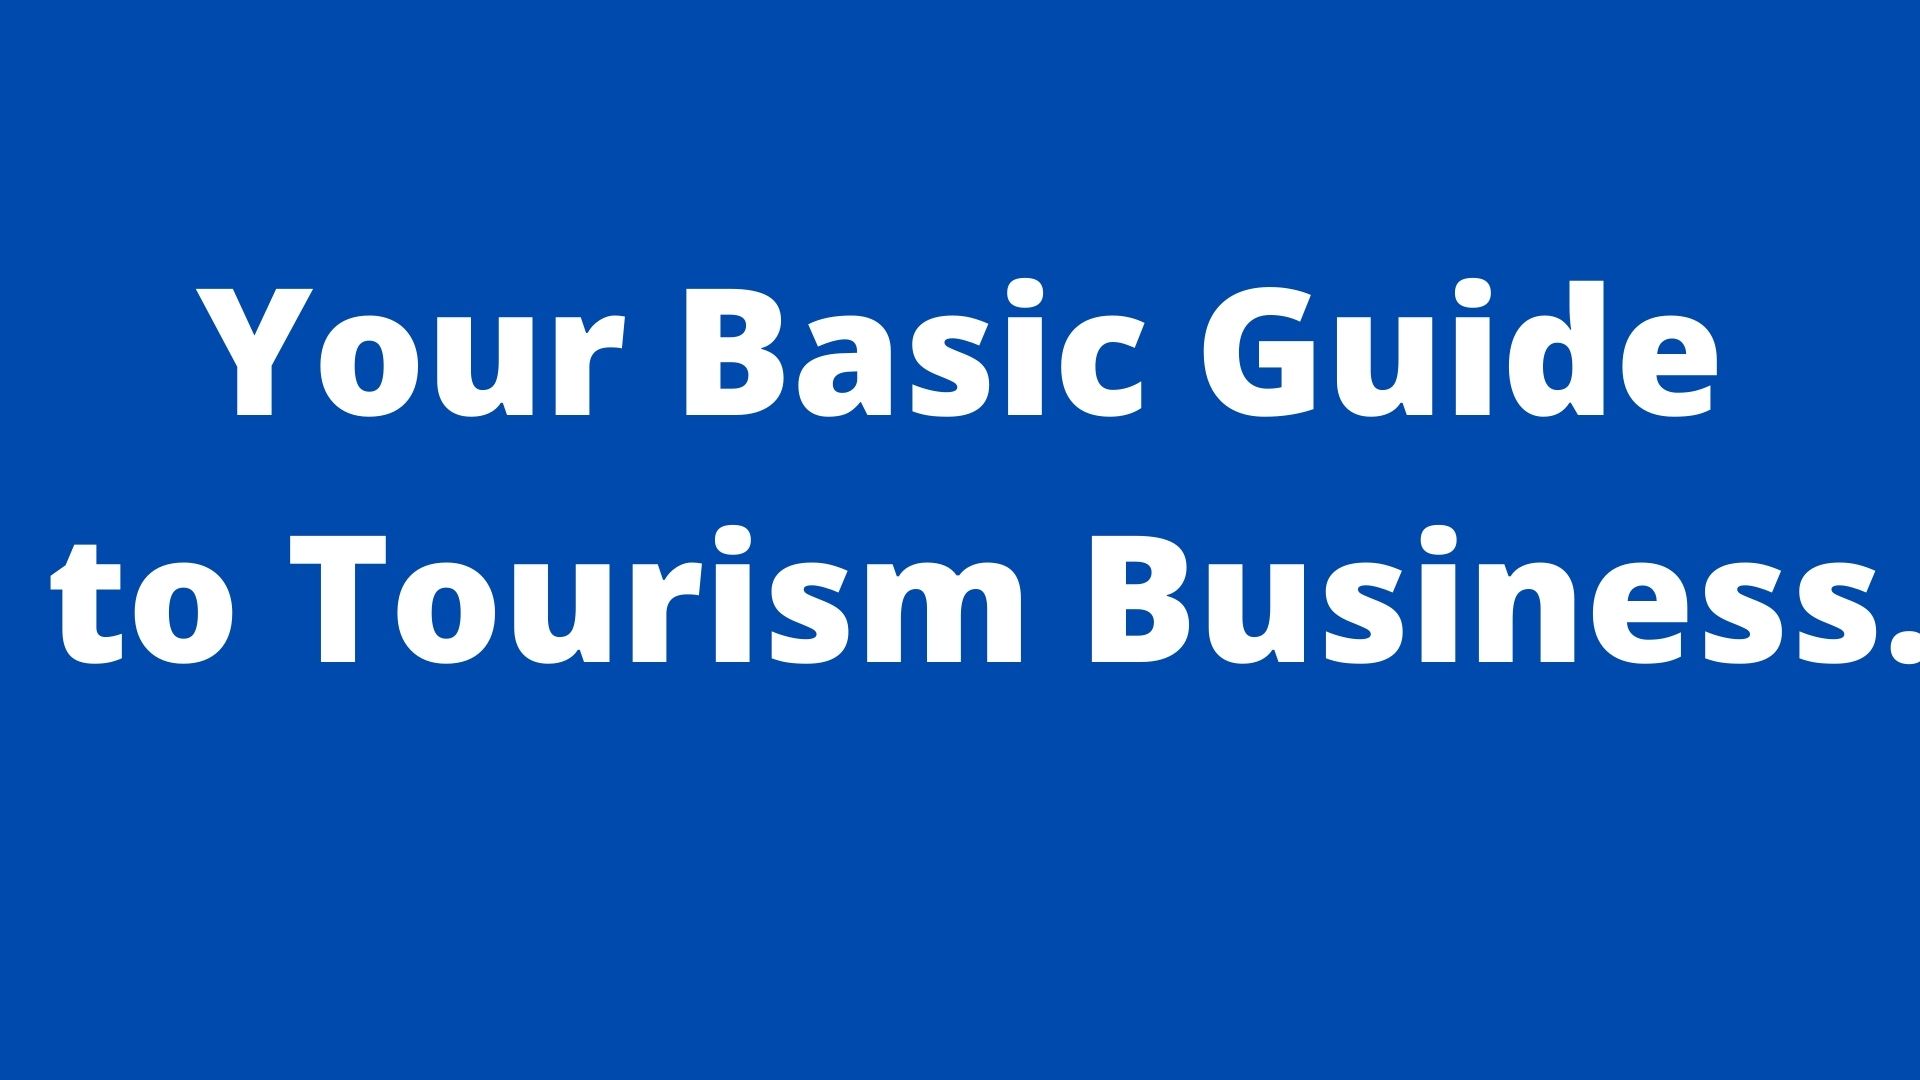 Guide To Tourism Business.